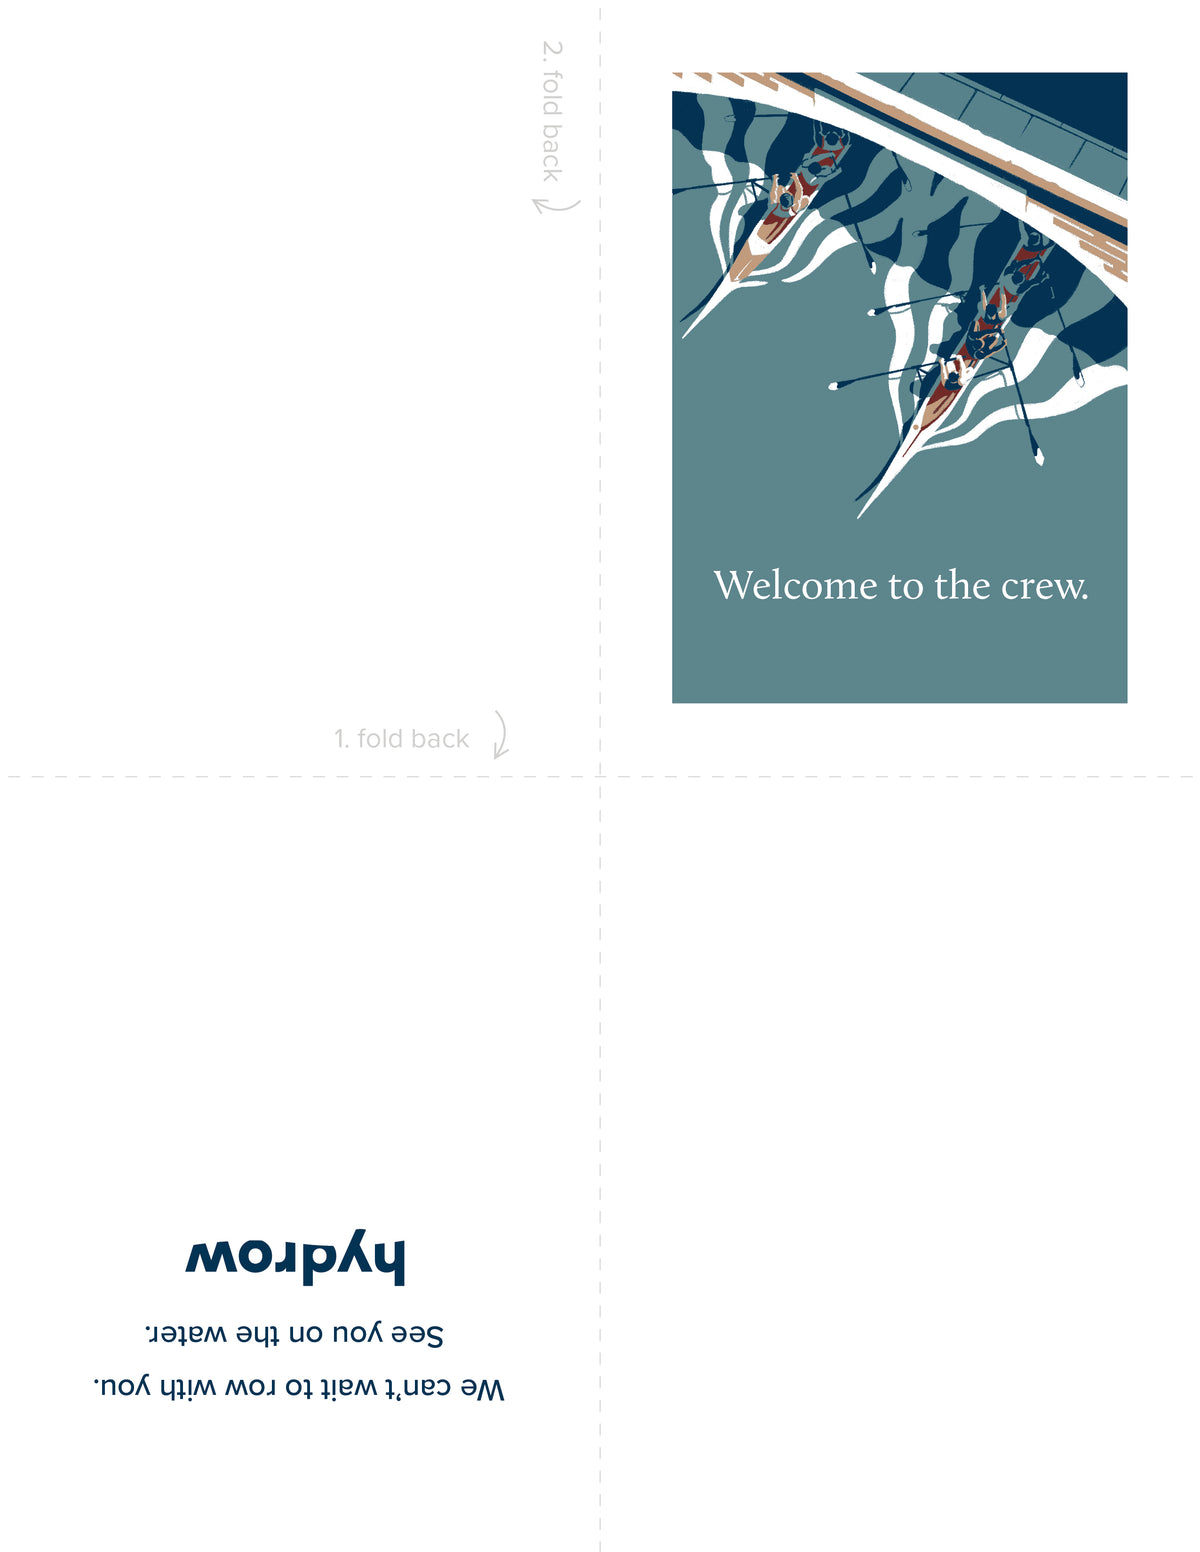 Printable foldable card featuring graphic of 2 row boats with text &quot;Welcome to the crew.&quot; interior text of &quot;We can&#39;t wait to row with you. See you on the water. hydrow&quot;